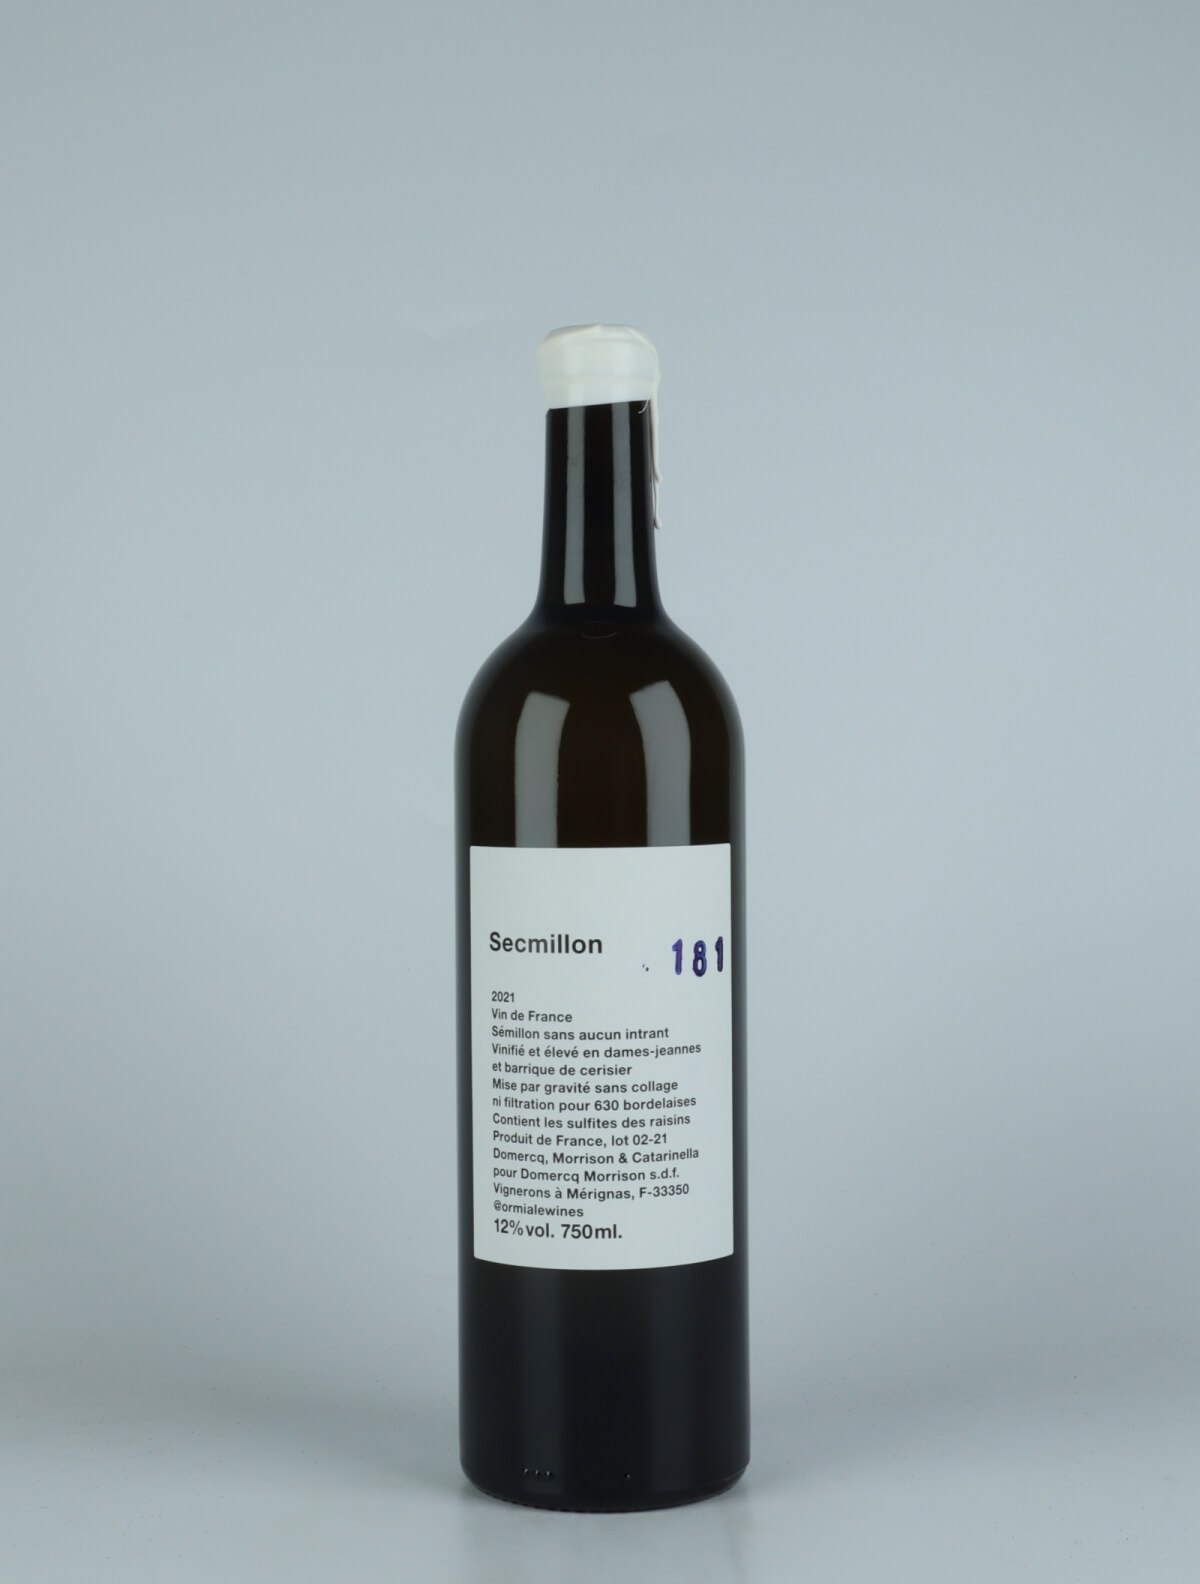 A bottle 2021 Secmillon White wine from Ormiale, Bordeaux in France